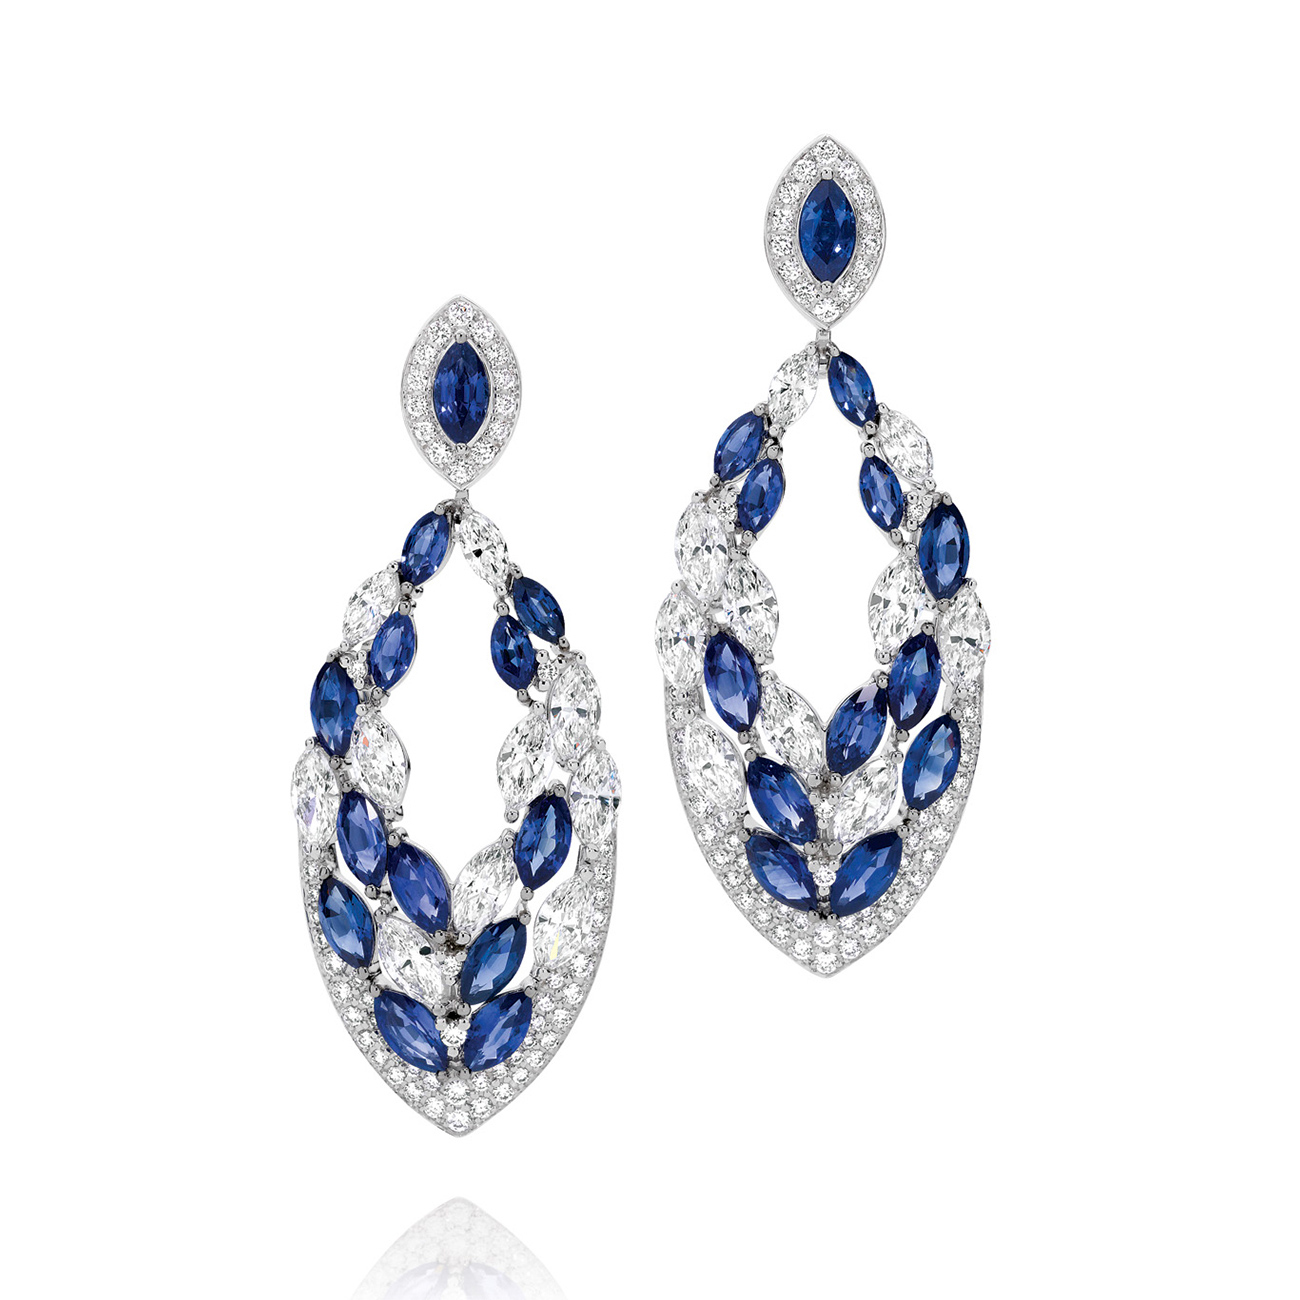 Blue Sapphire and Diamond Drop Earrings In 18K White Gold